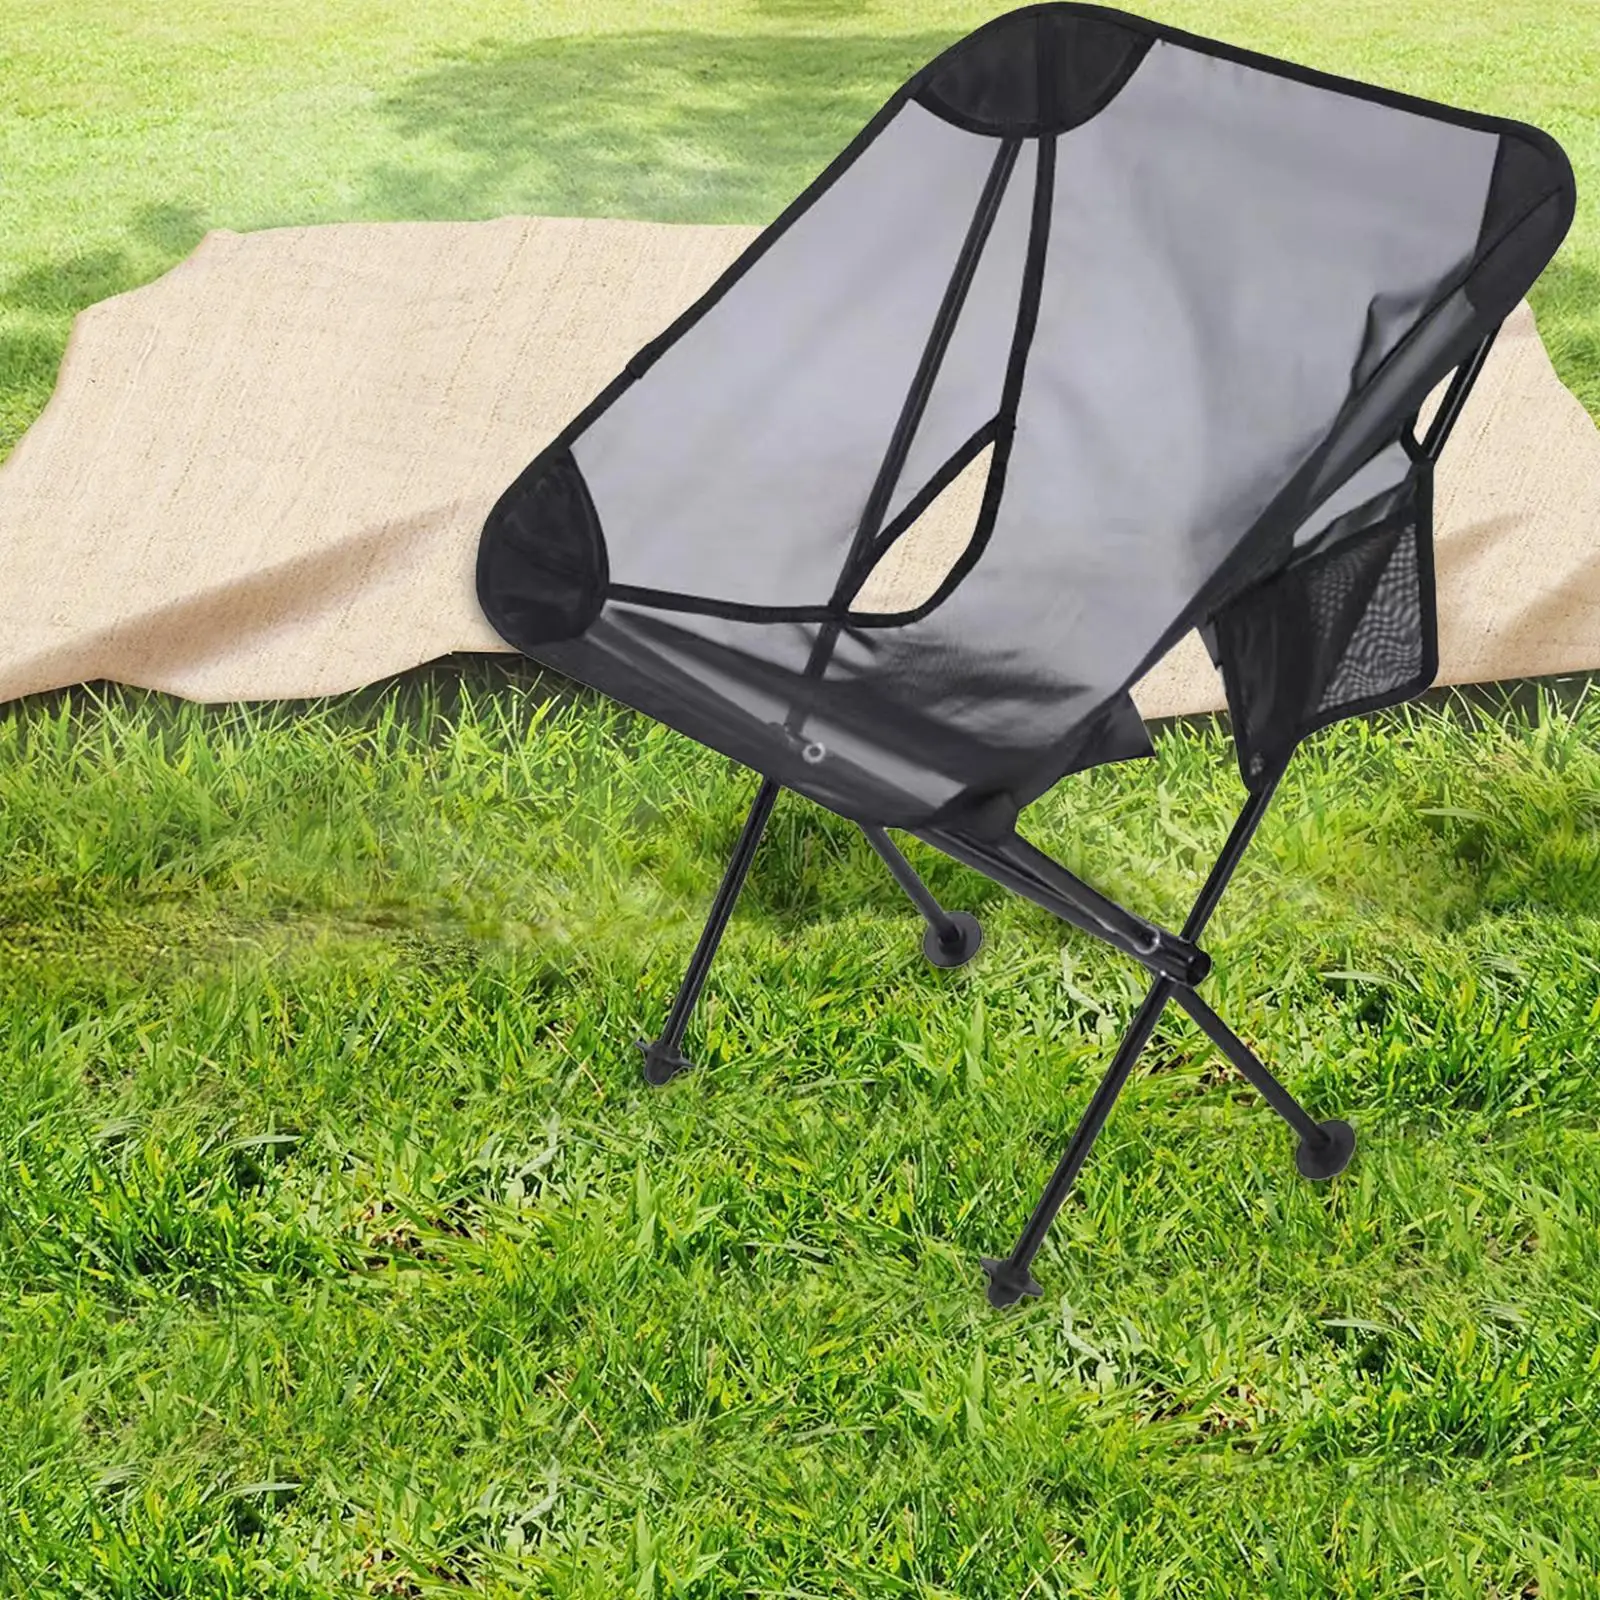 Folding Camping Chair Folding Chair Outdoor Concerts Sporting Events Parks Picnics Campings Camping Picnic Chair Beach Chair